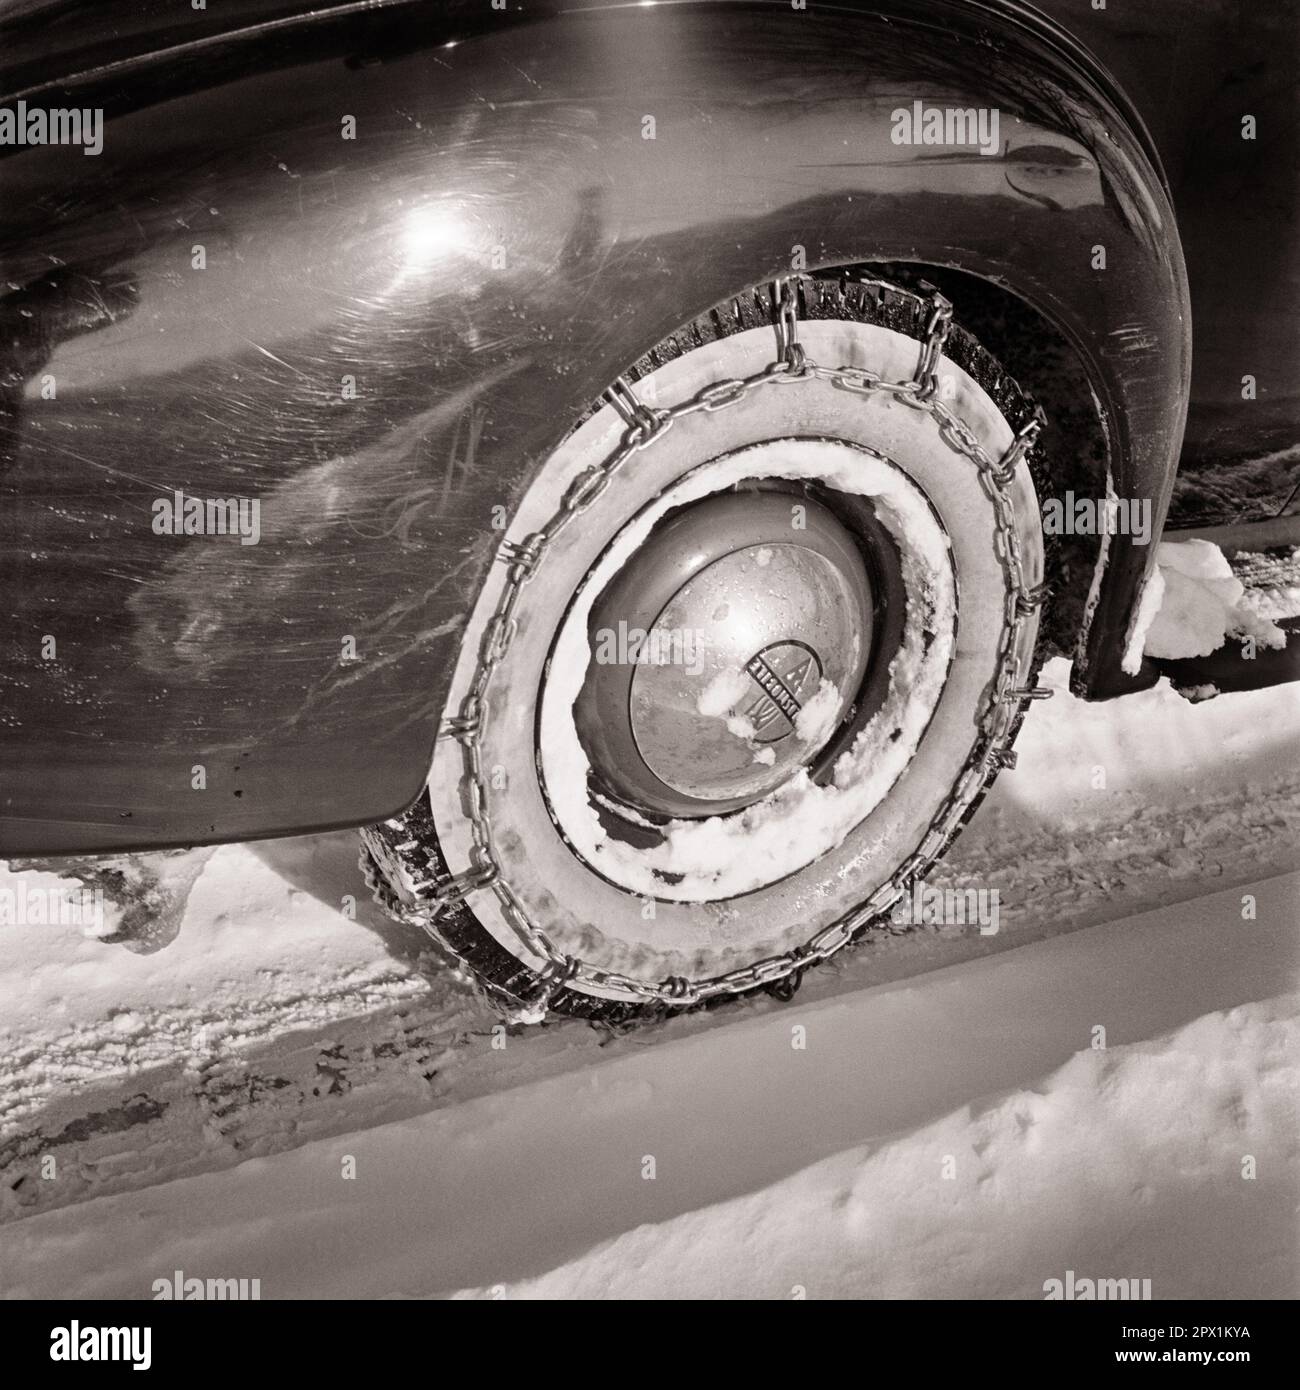 1930s CLOSE-UP OF SNOW CHAINS ON THE TIRE OF AN OLDSMOBILE CAR PROVIDING INCREASED TRACTION WHEN DRIVING IN WINTER SNOW AND ICE - m6370 HAR001 HARS OLD FASHIONED Stock Photo